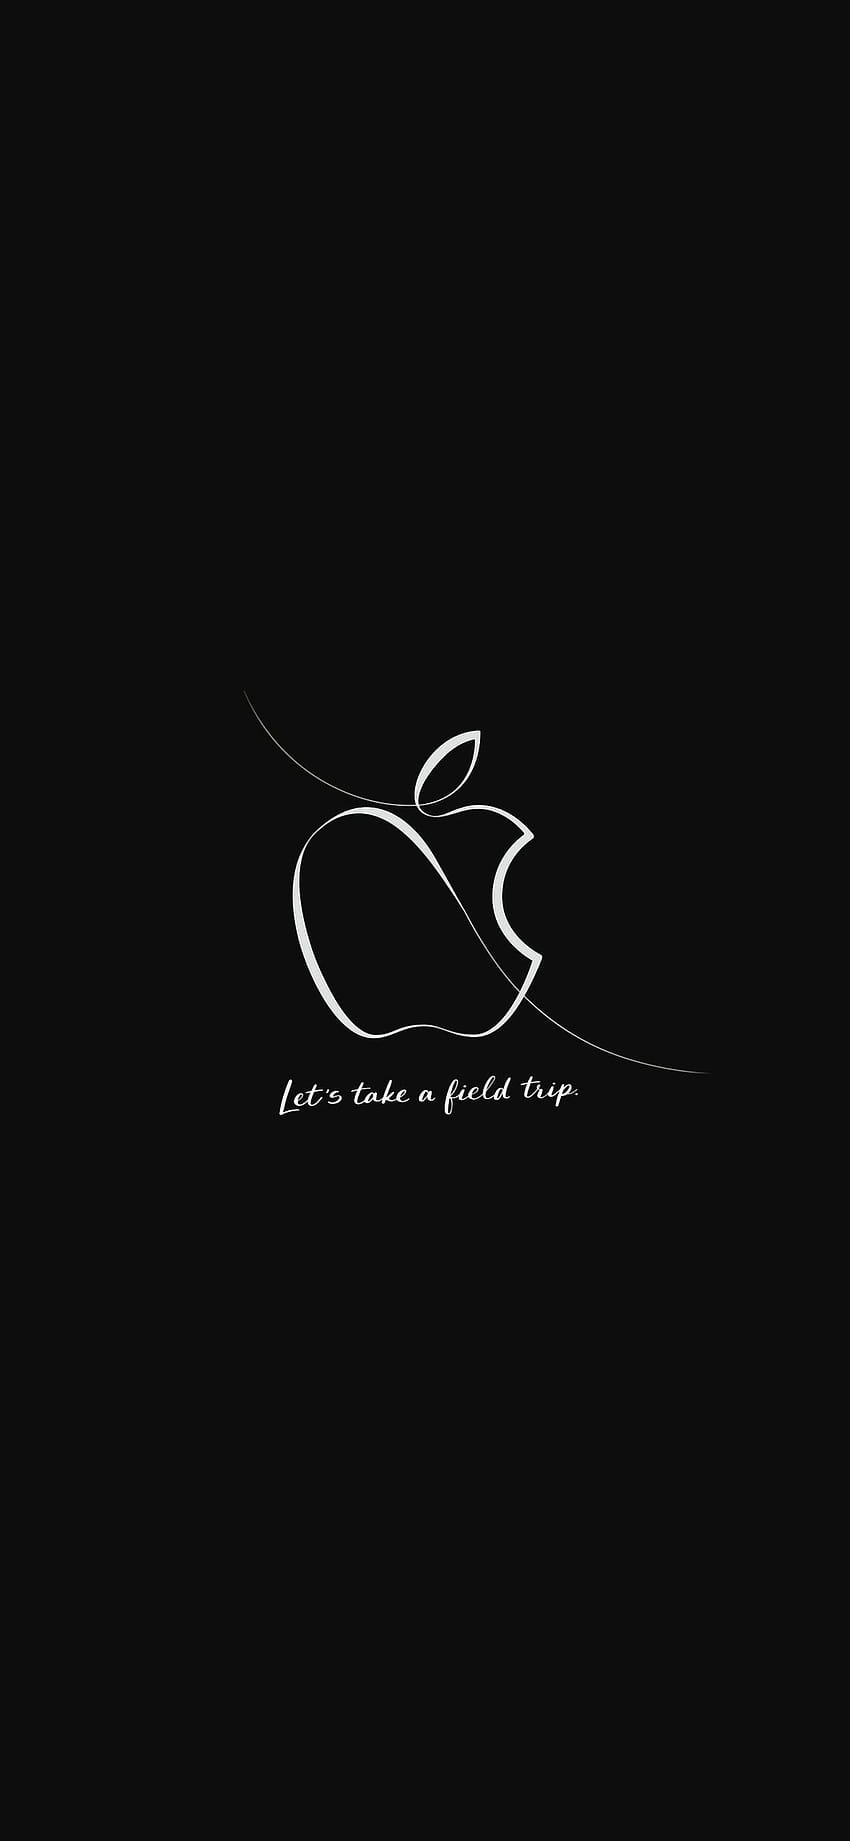 Apple 'Let's take a field trip' media event, iphone black apple HD phone wallpaper